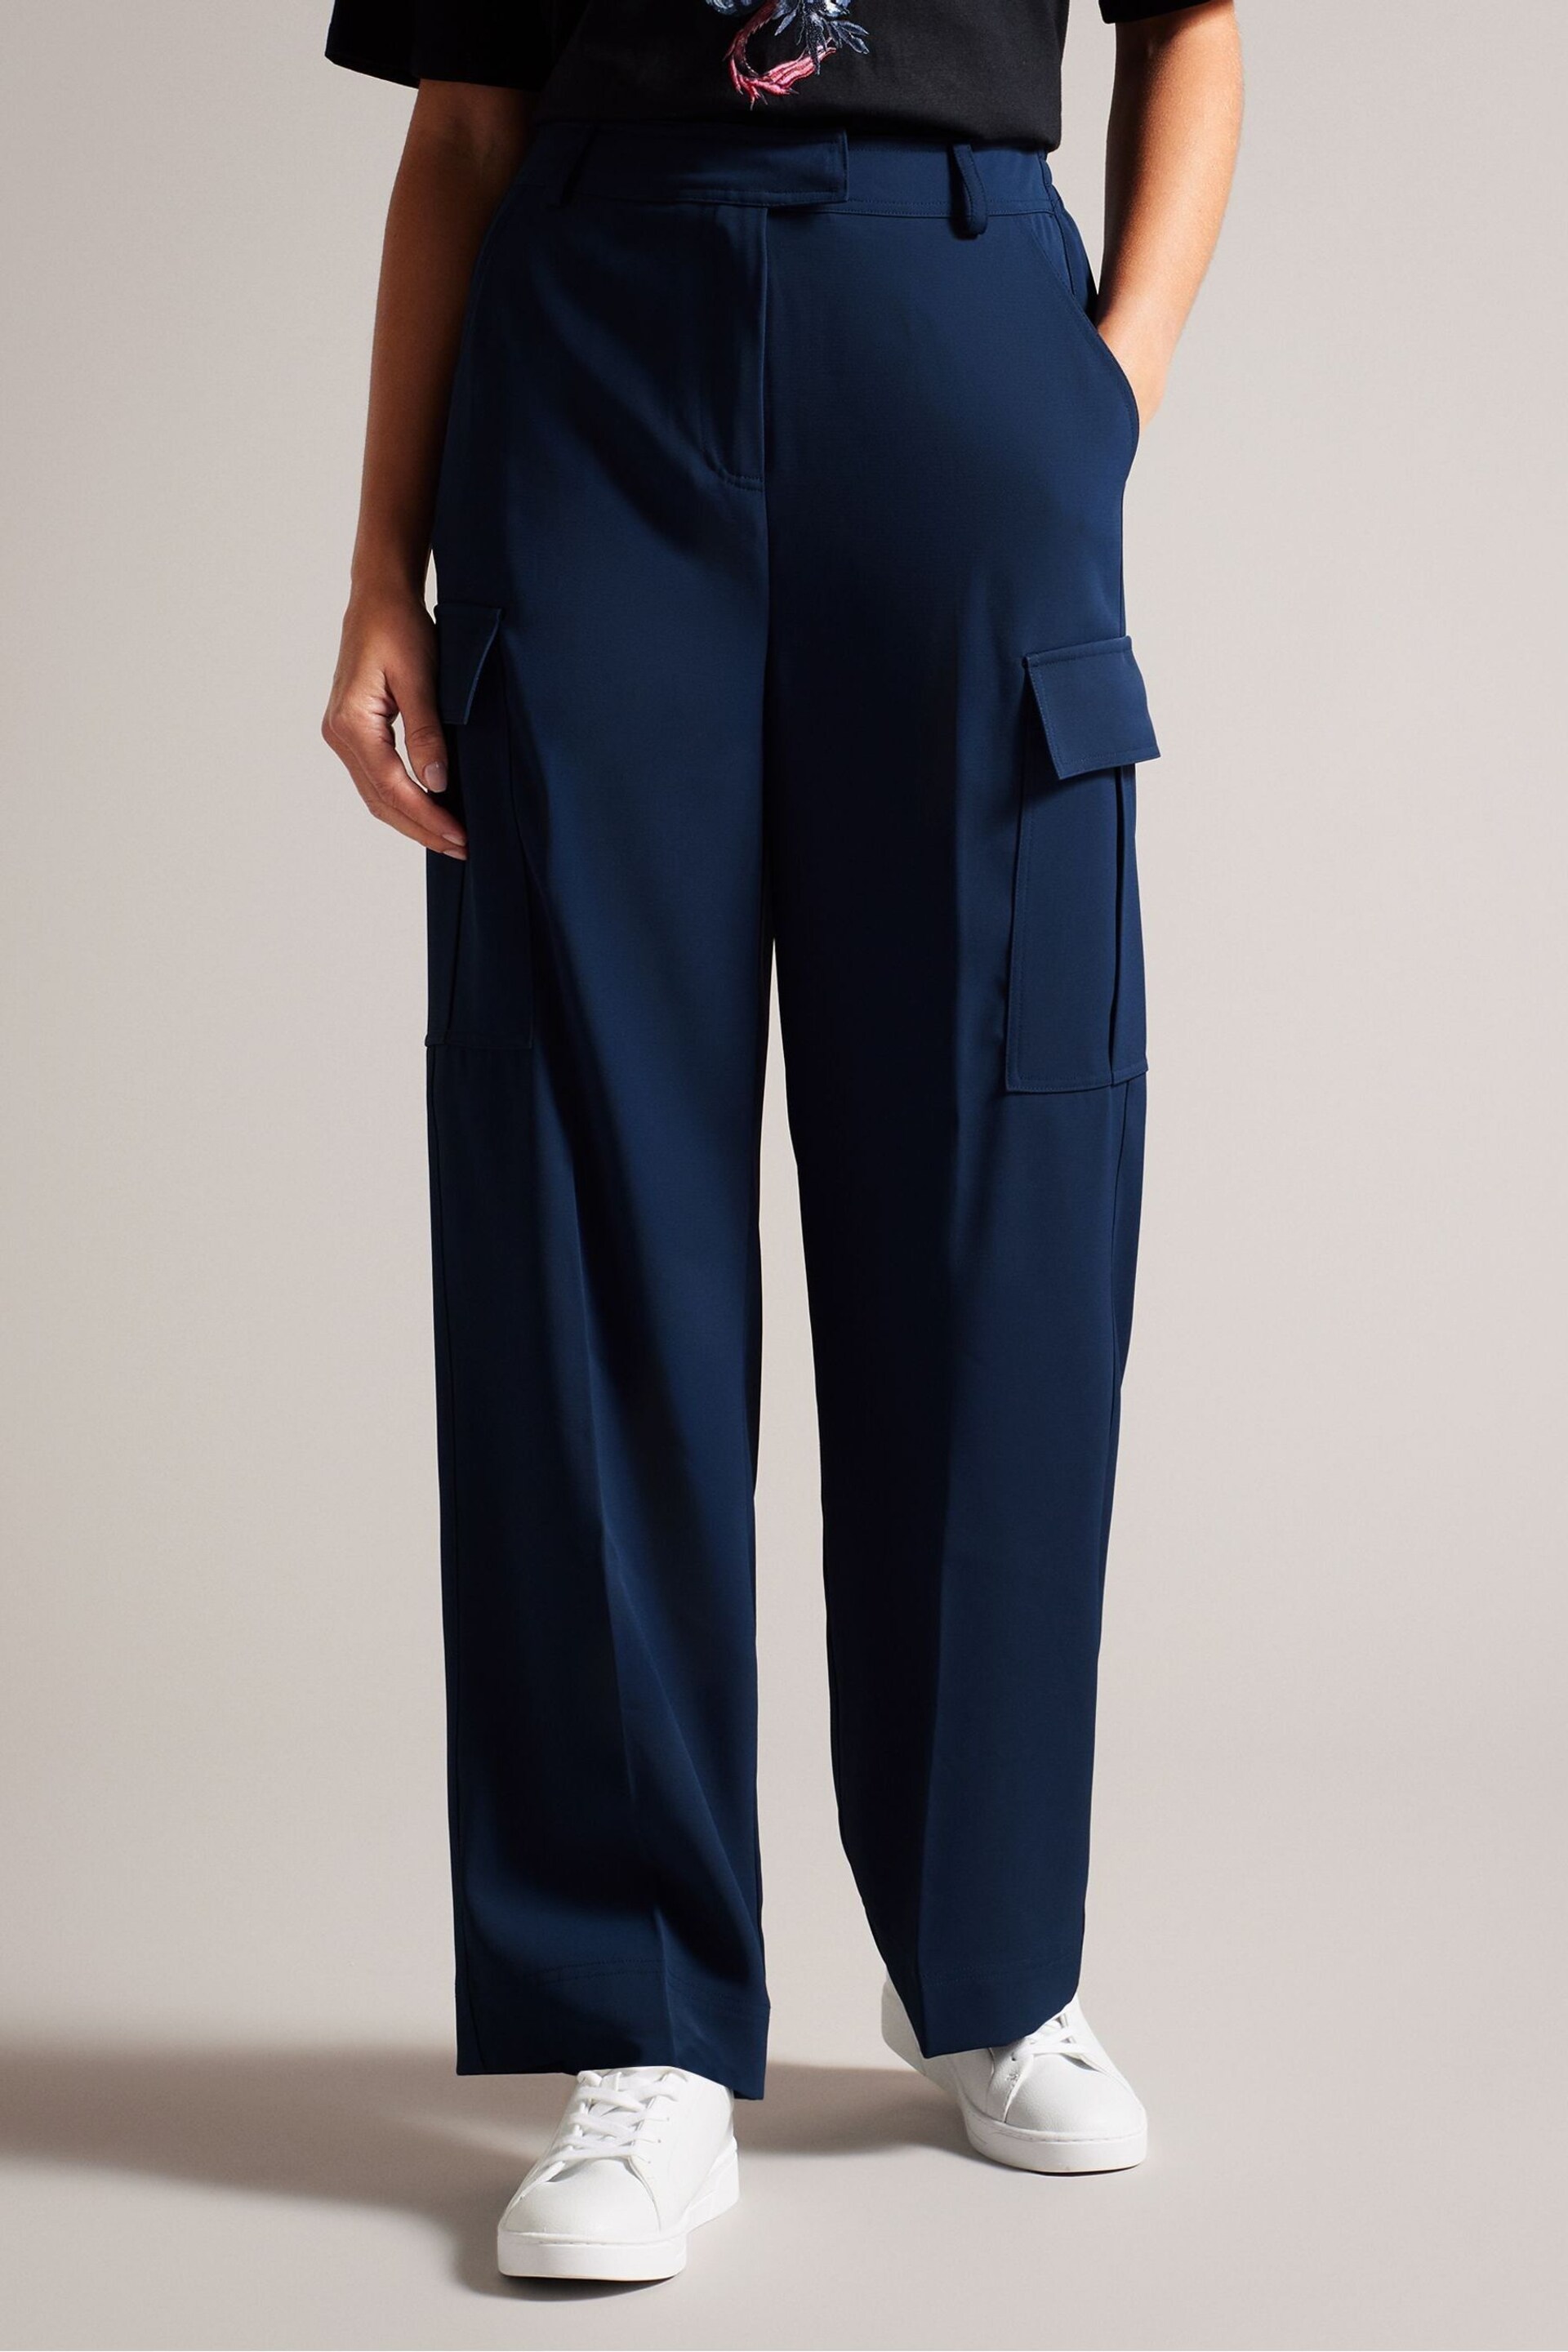 Ted Baker Blue Roccio High Waisted Wide Leg Cargo Trousers - Image 1 of 5